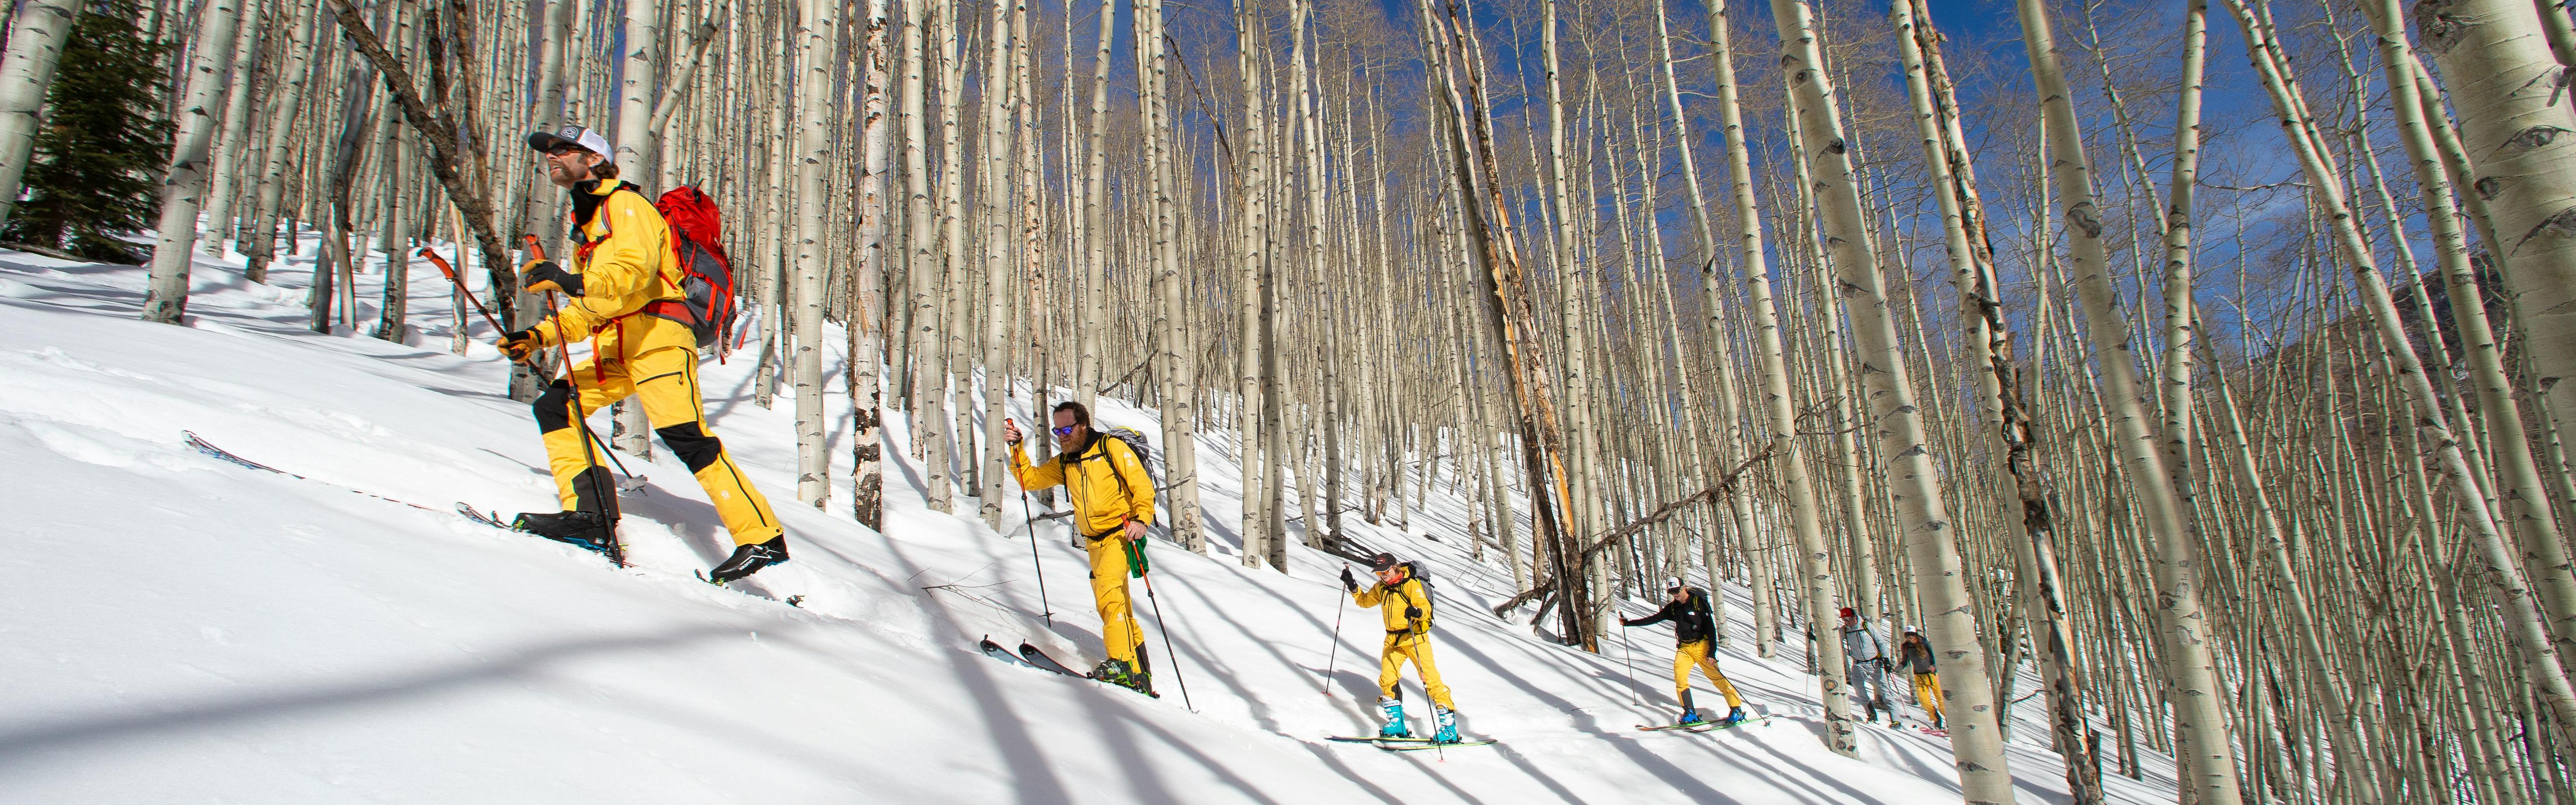 Backcountry skiers hiking up a snowy slope in a forest.